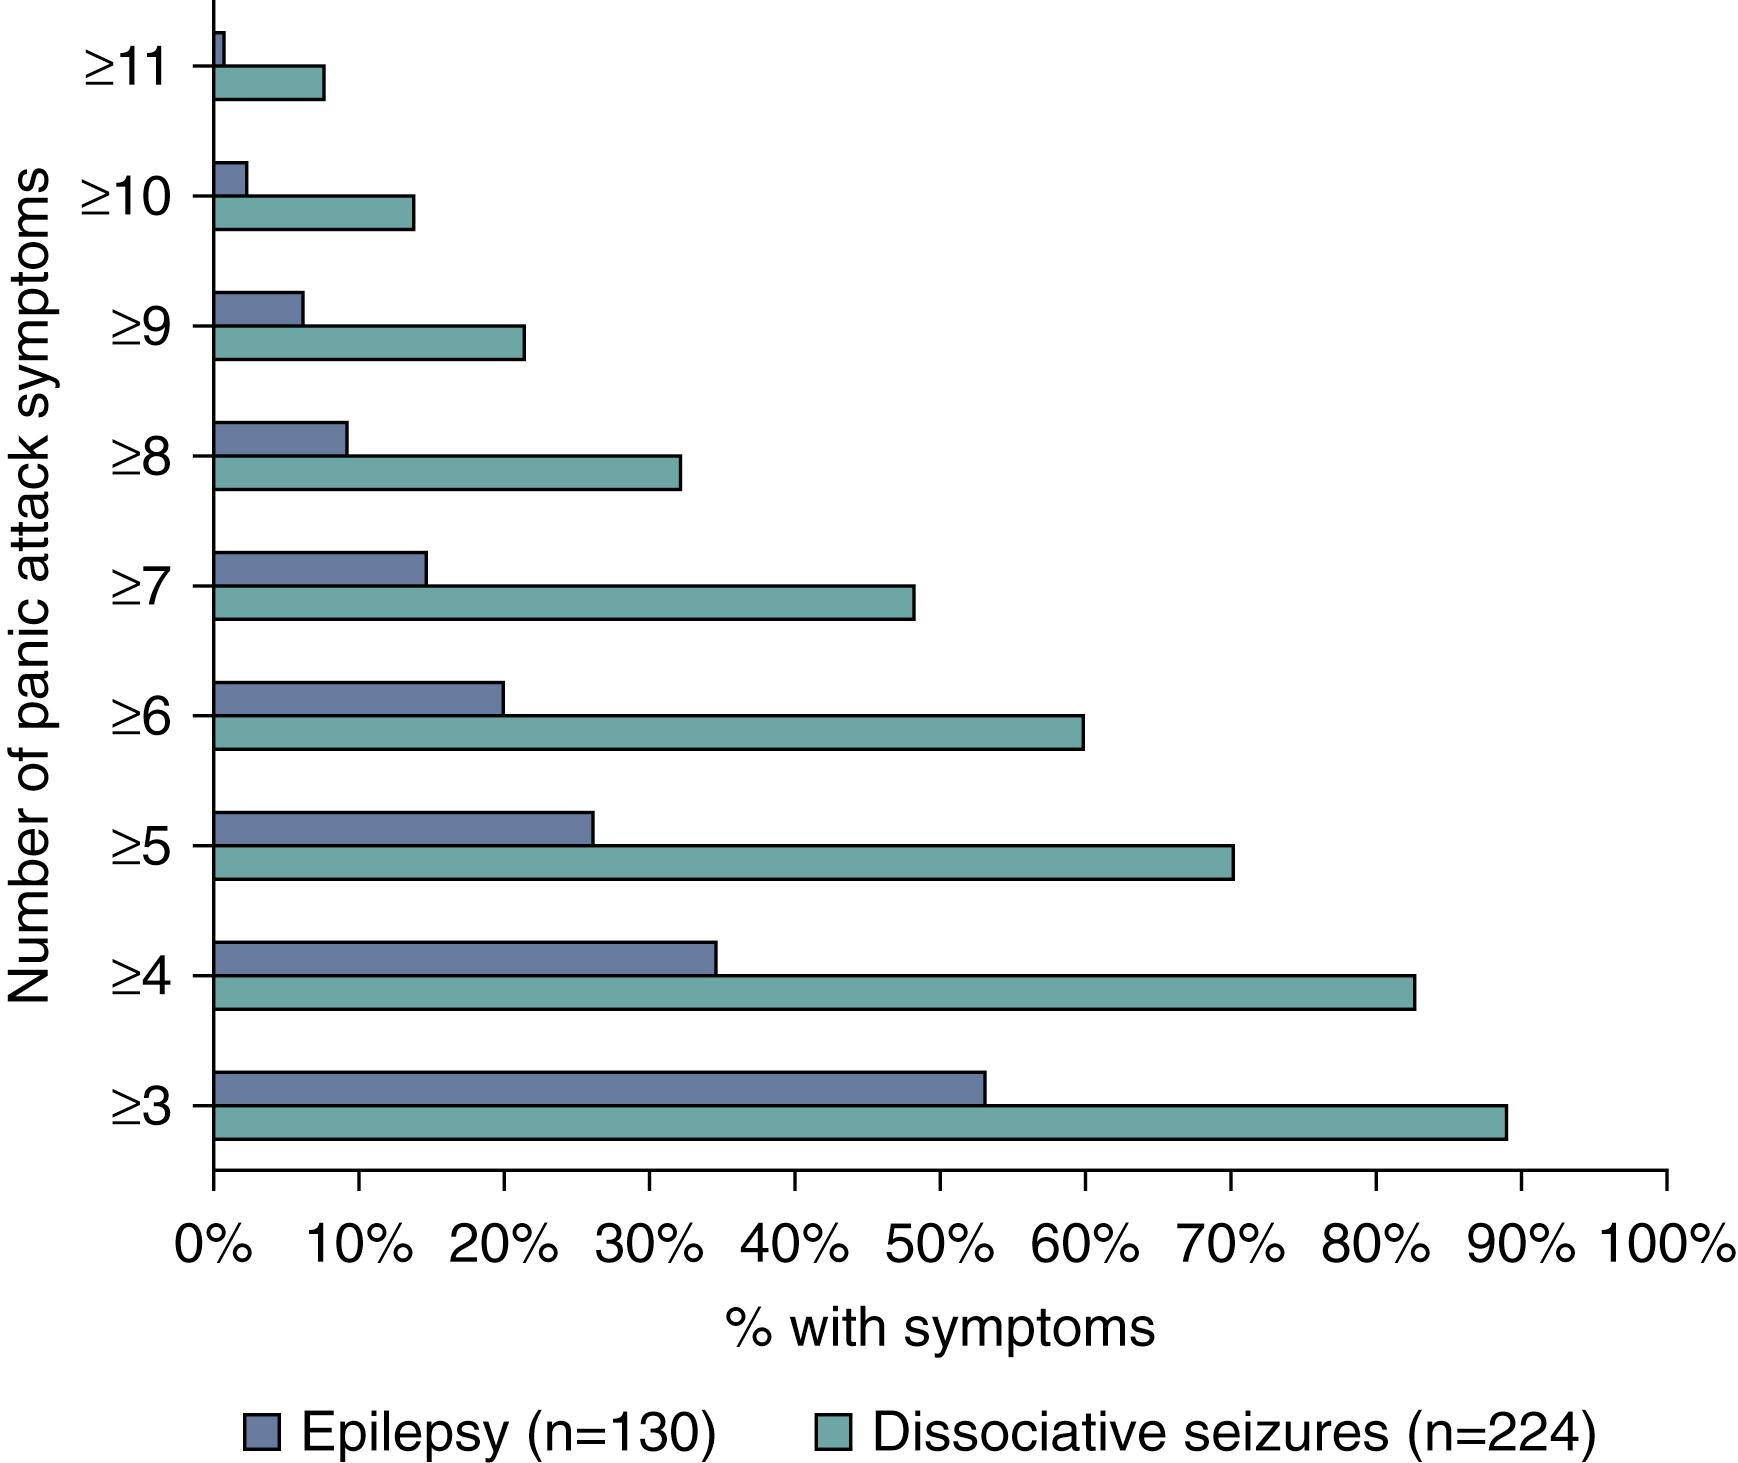 Fig. 113.1, Prodromal symptoms of panic are much more common in dissociative (nonepileptic) attacks than epilepsy. Although they may not initially be disclosed, they provide an opportunity for treatment.